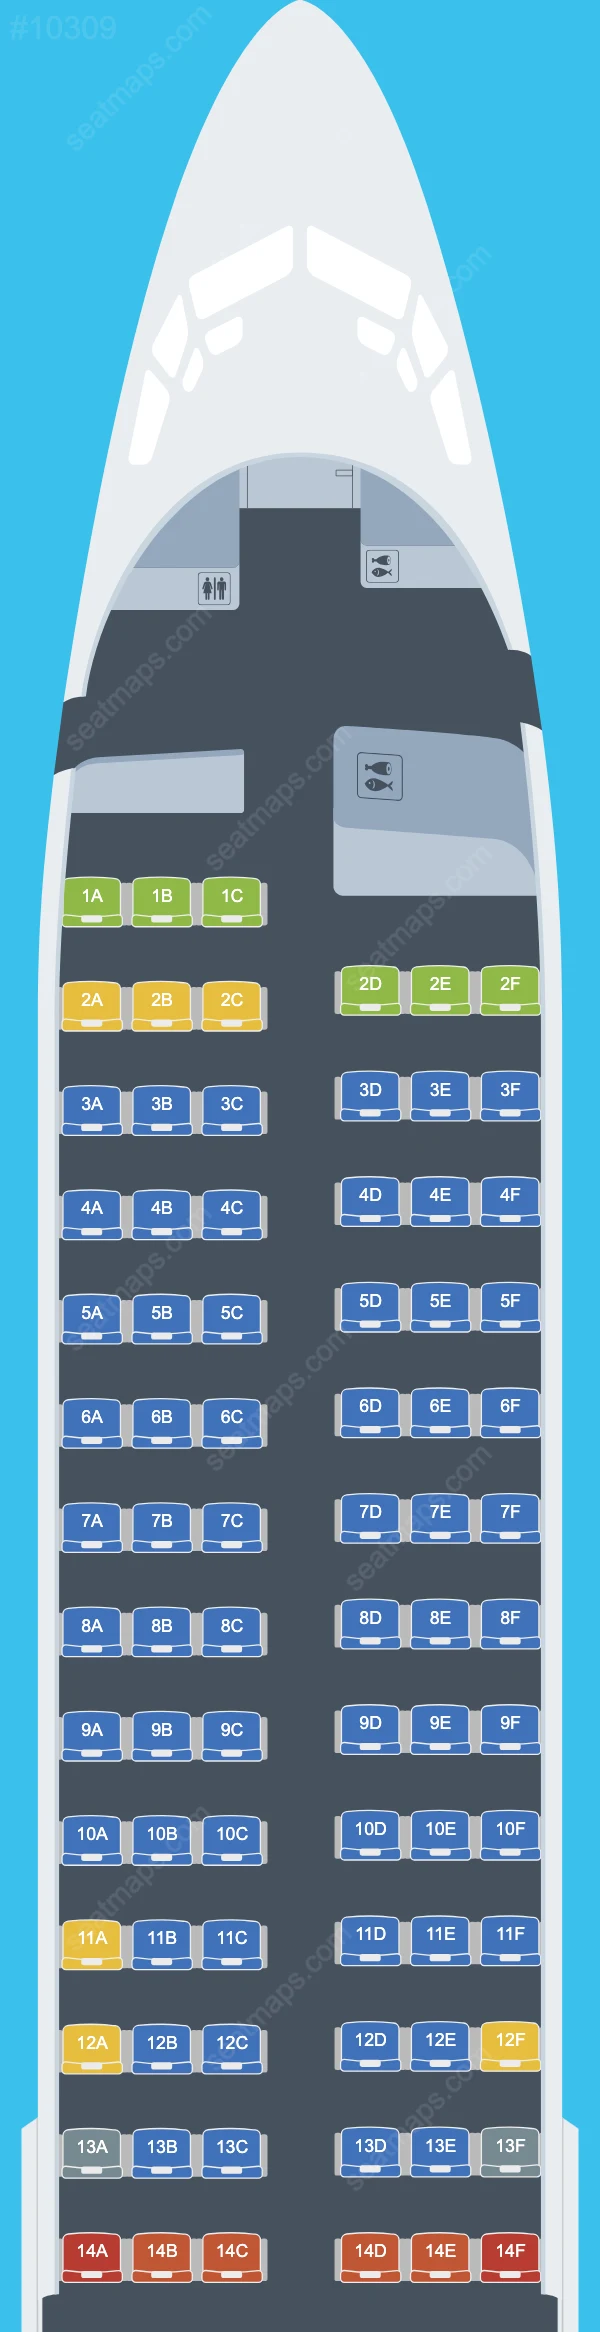 AJet Boeing 737 aircraft seat map  737-800 V.1